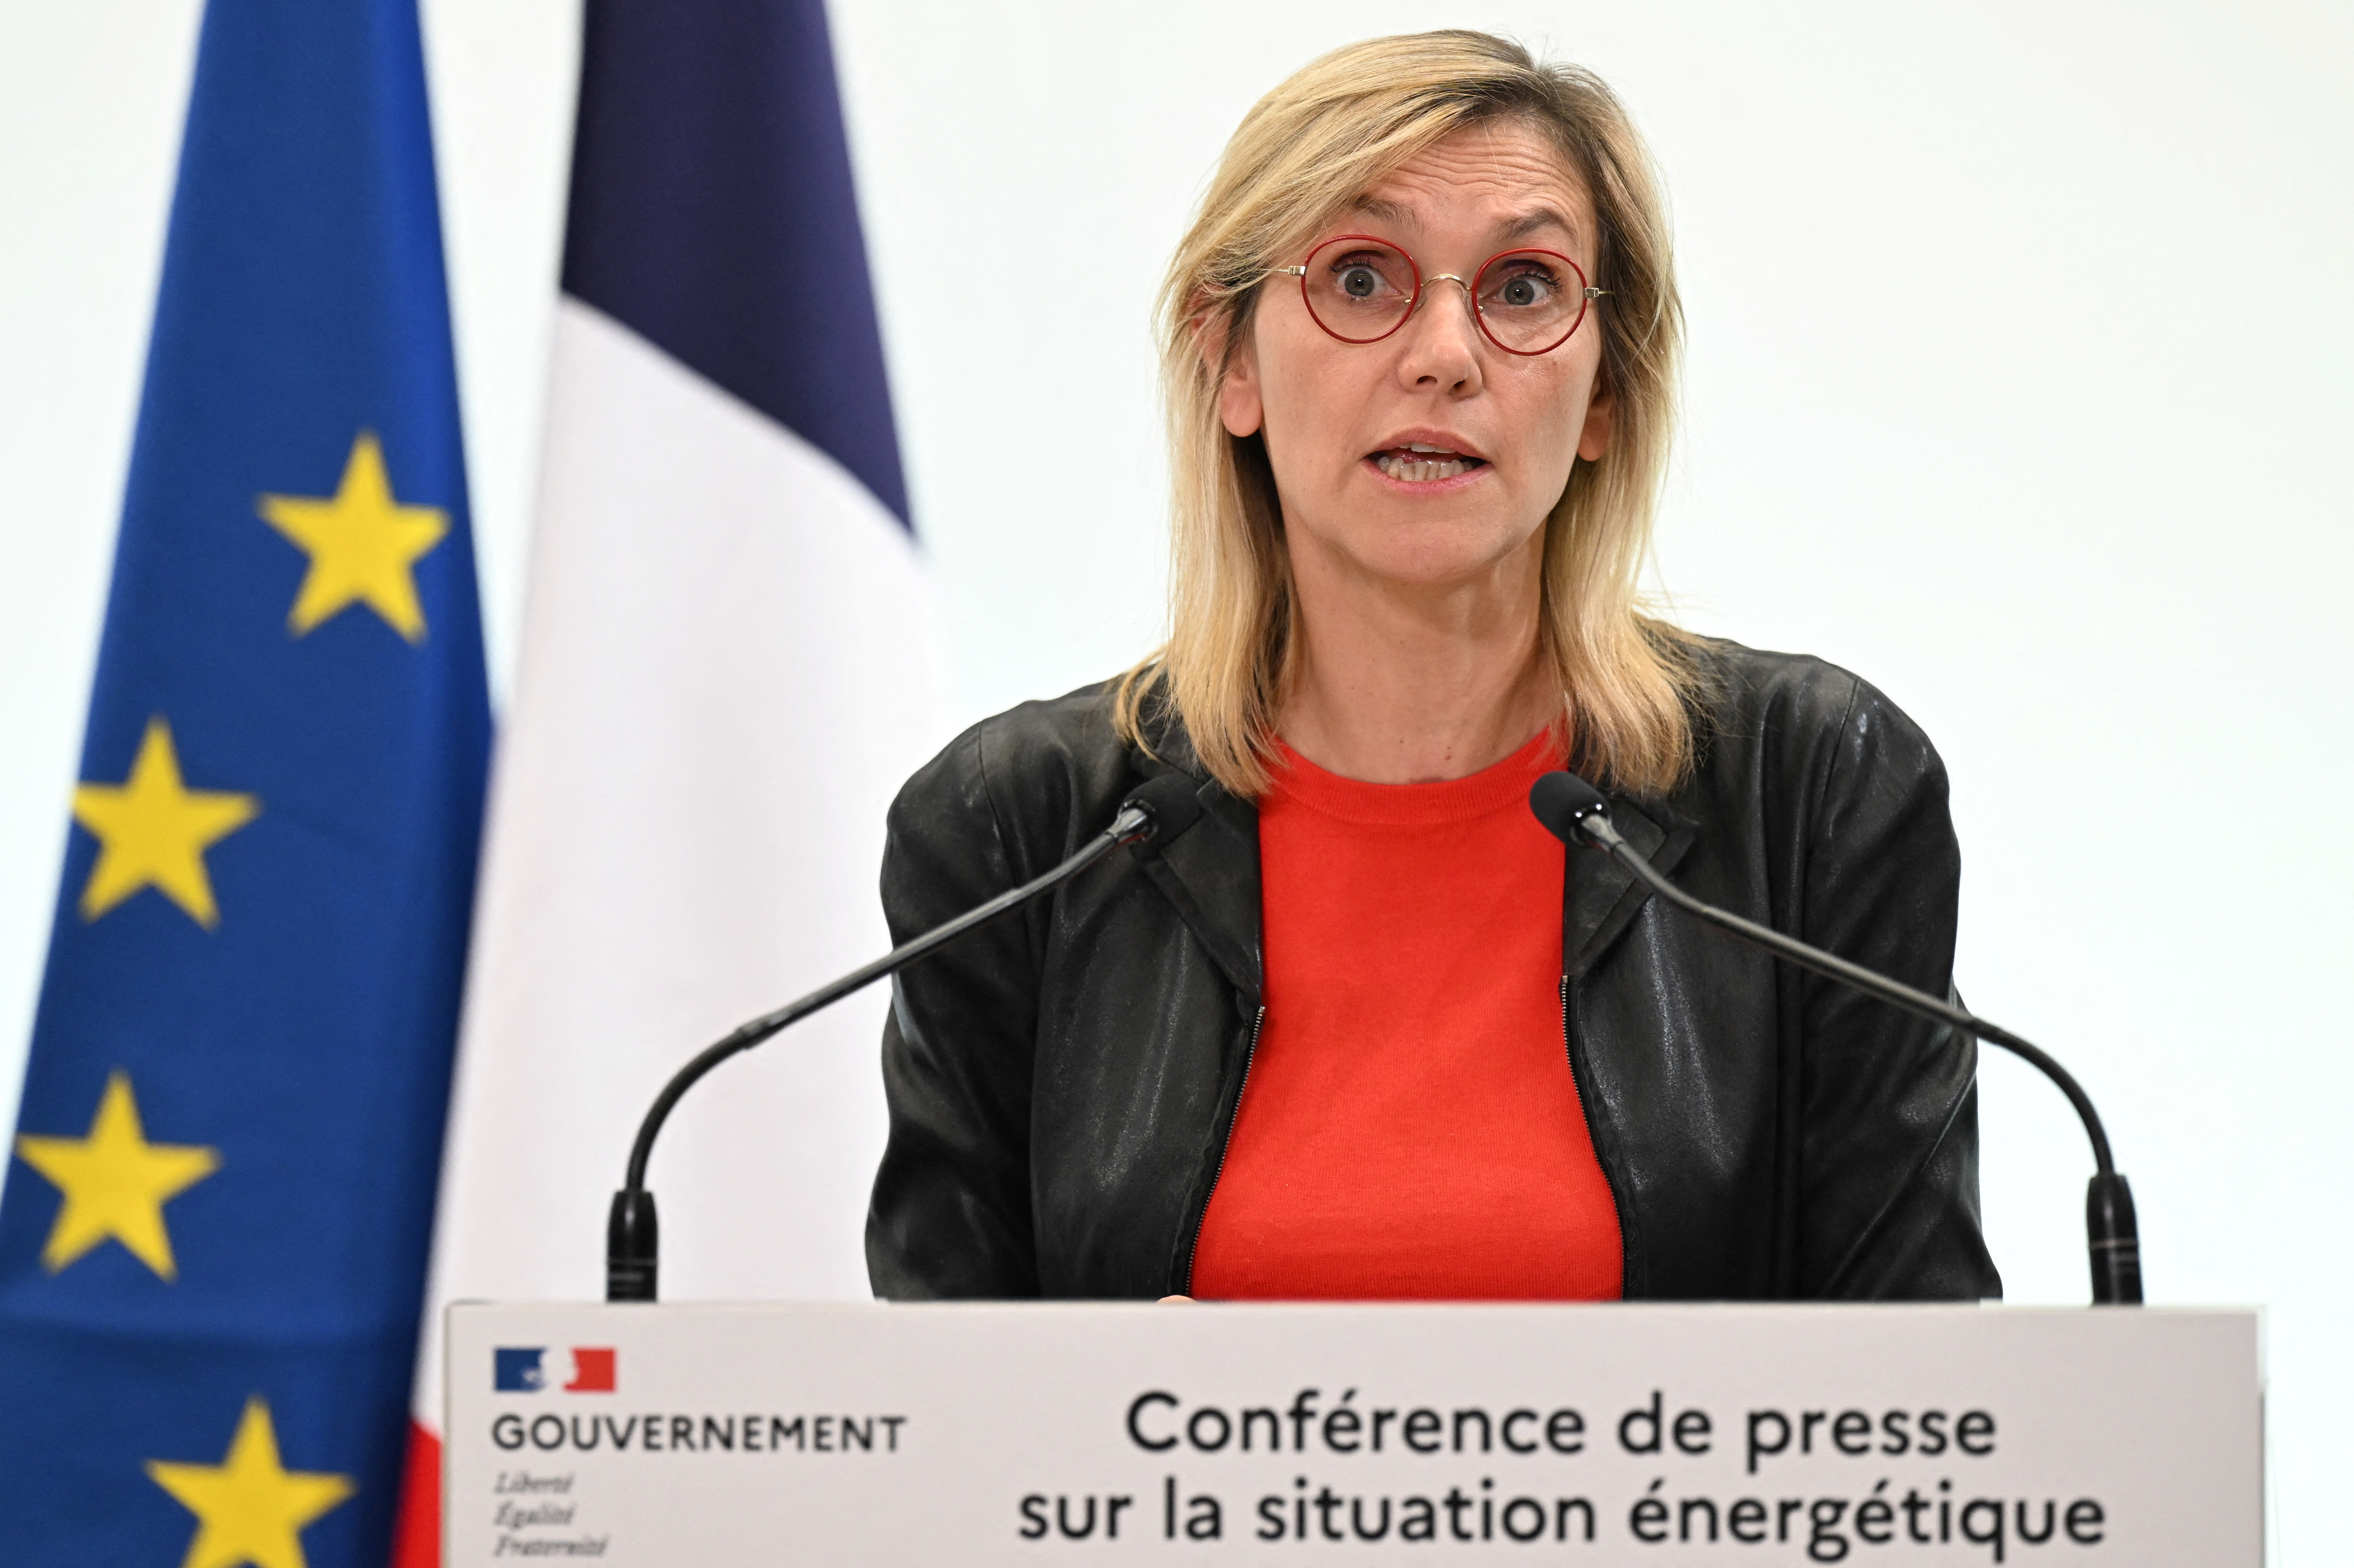 French Minister for Energy Transition Agnes Pannier-Runacher attends a press conference on the energy situation in France and Europe, in Paris